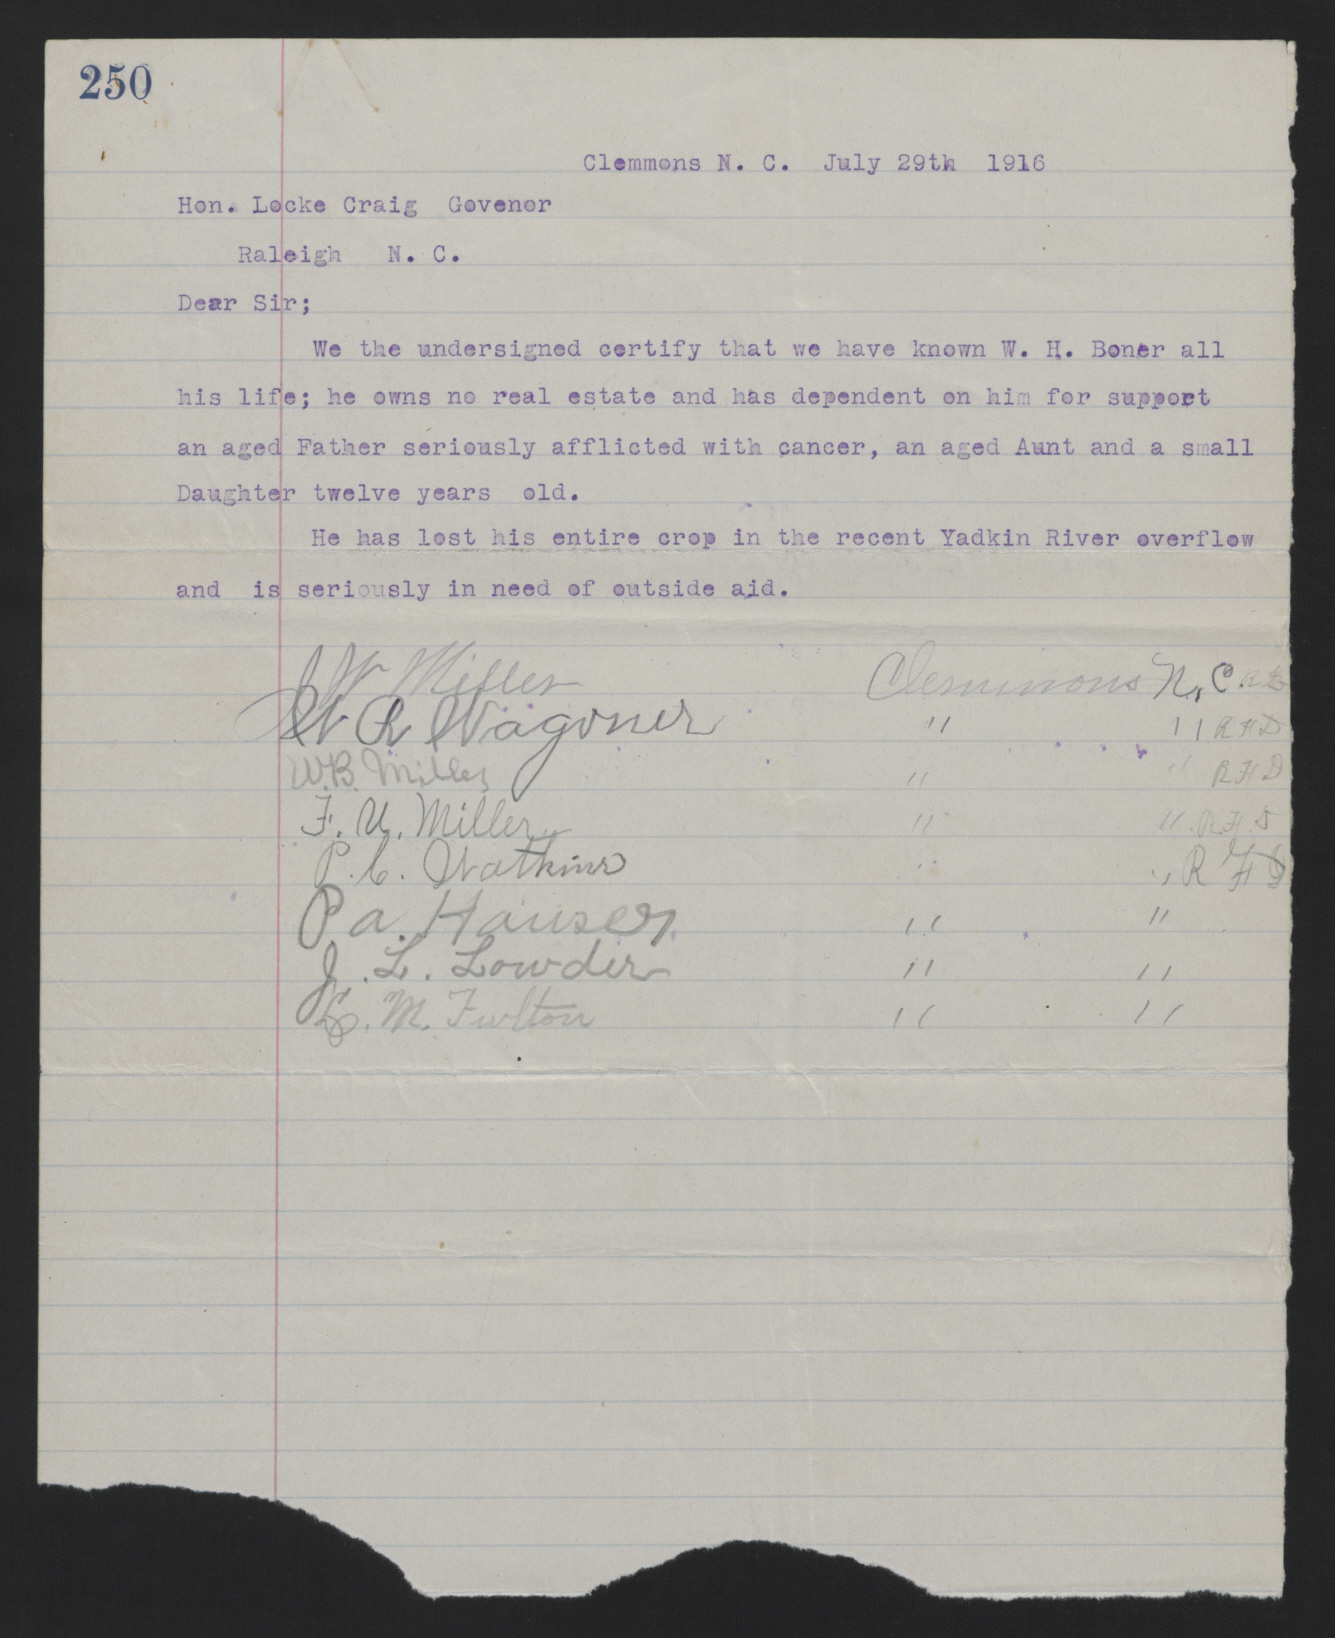 Letter from Citizens in Clemmons to Locke Craig, July 29, 1916